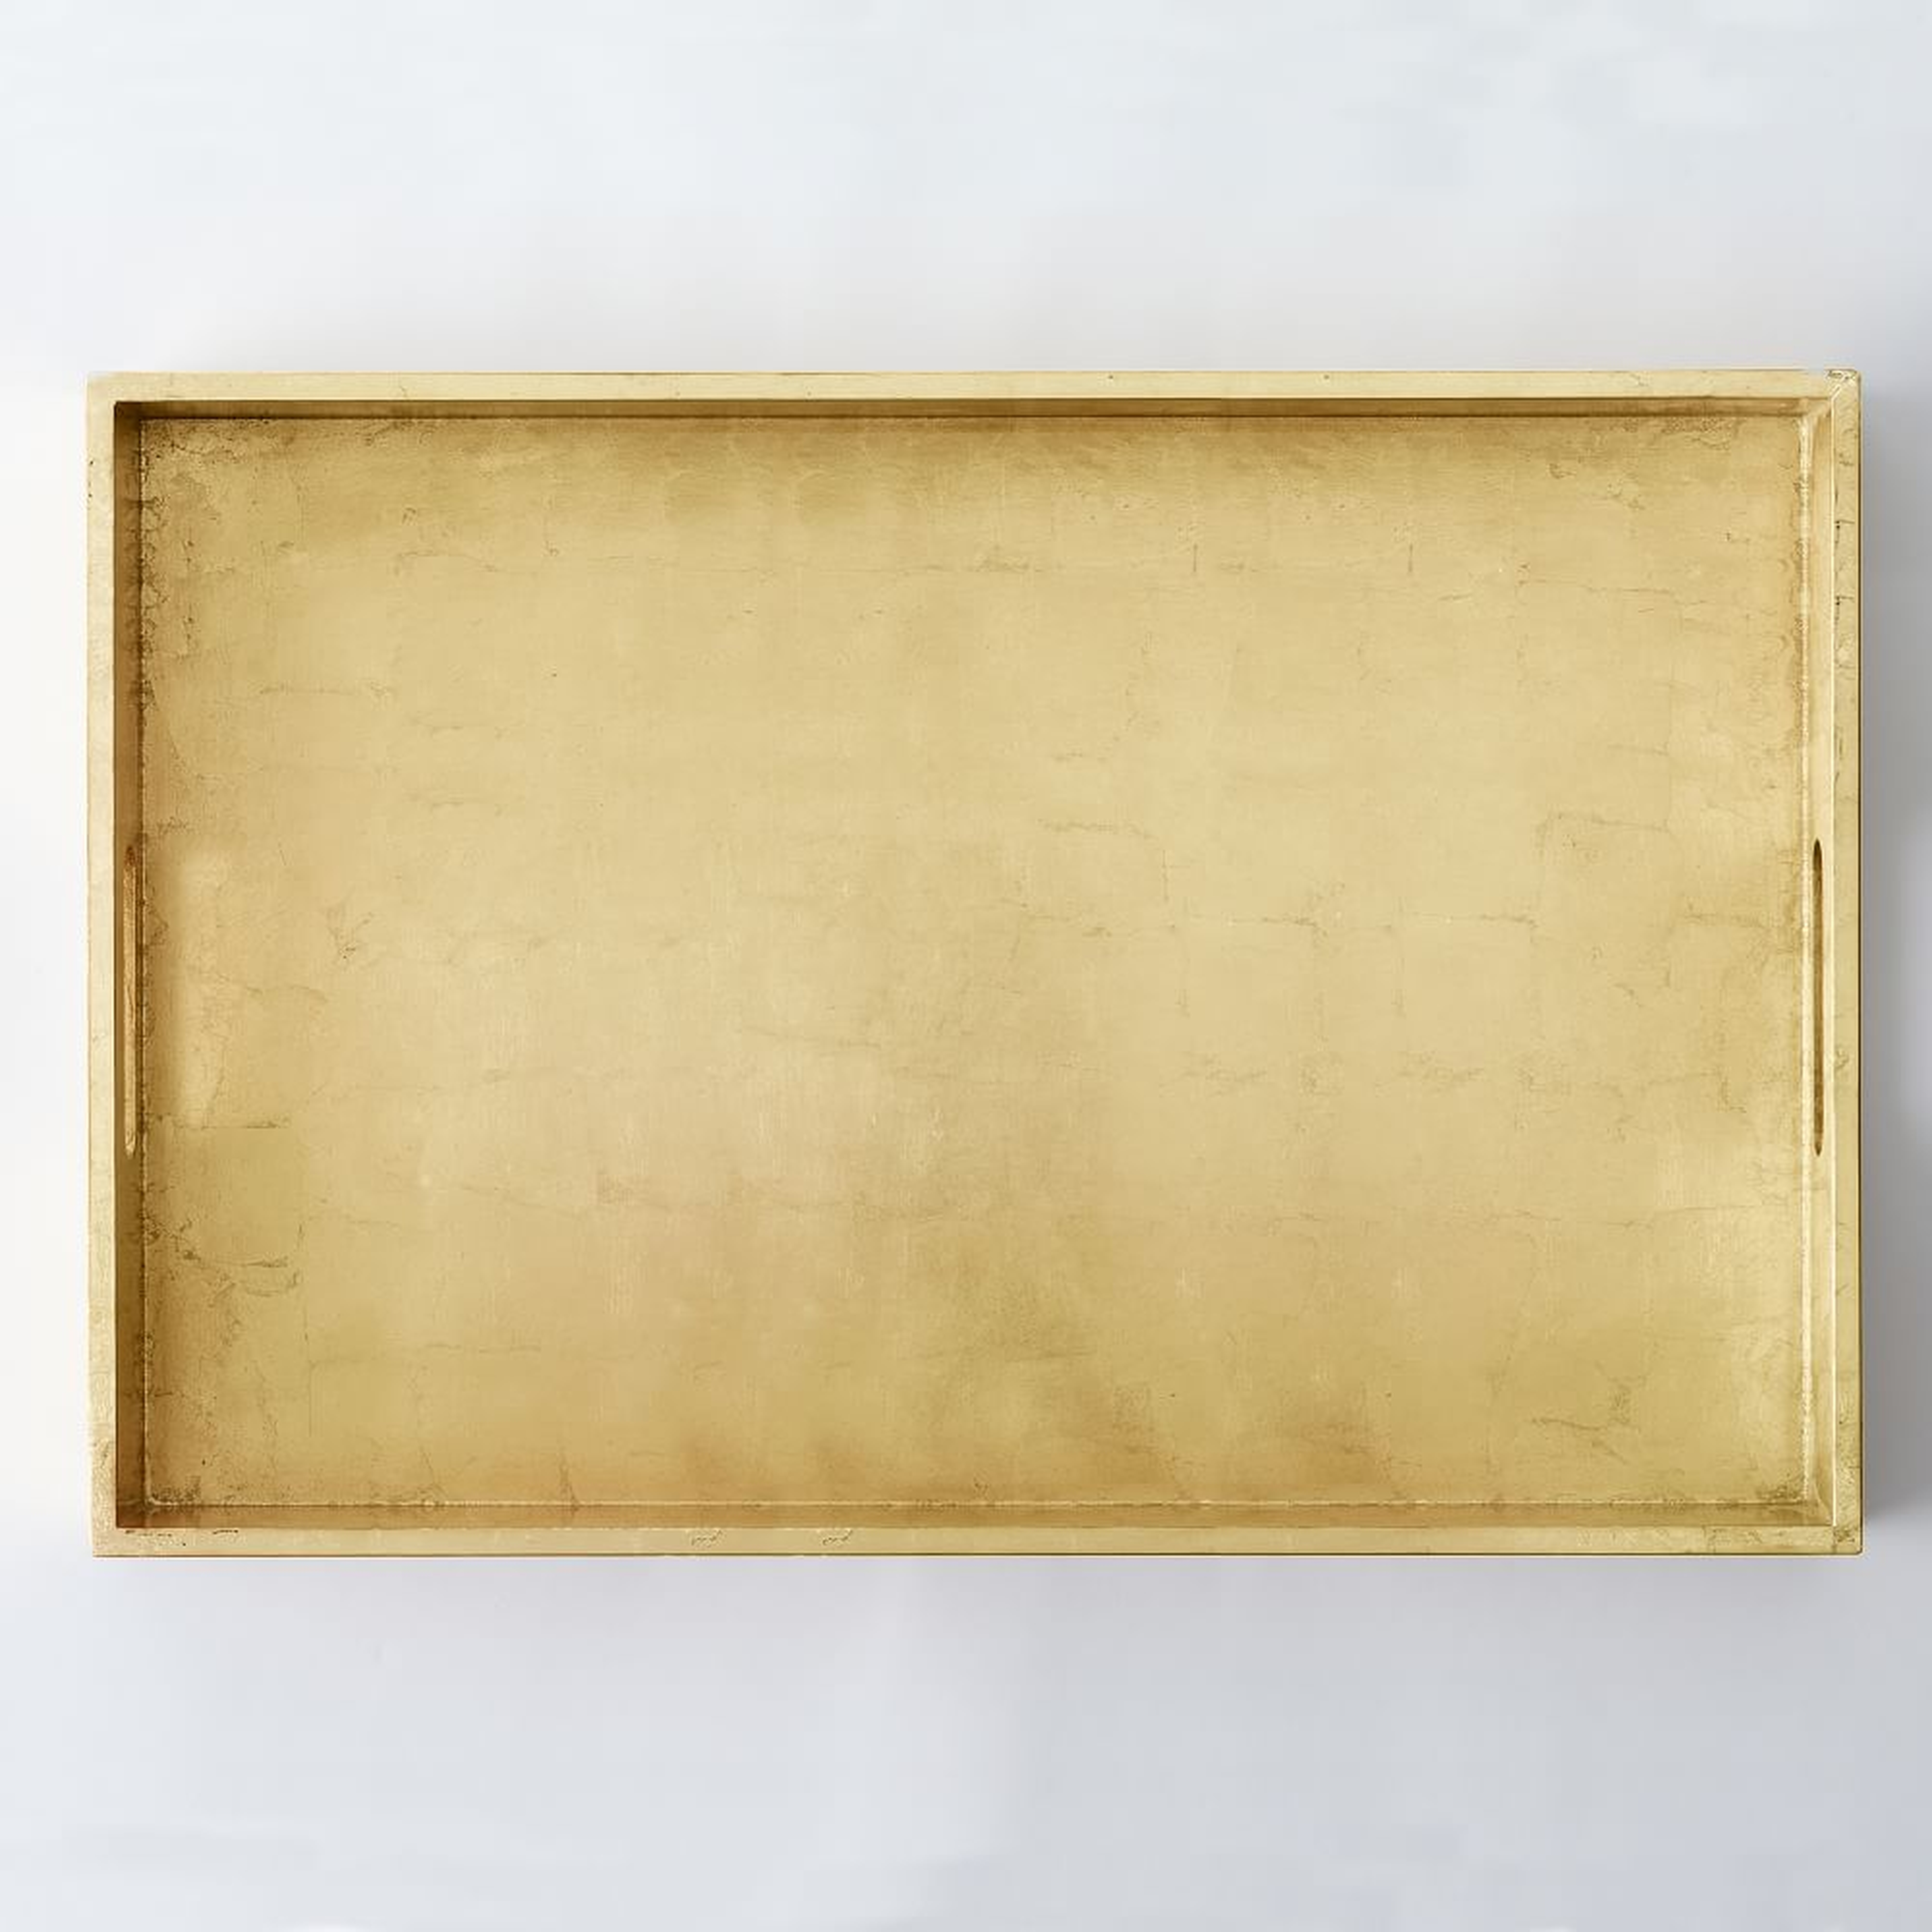 Lacquer Wood Tray 18"x28", Gold - West Elm